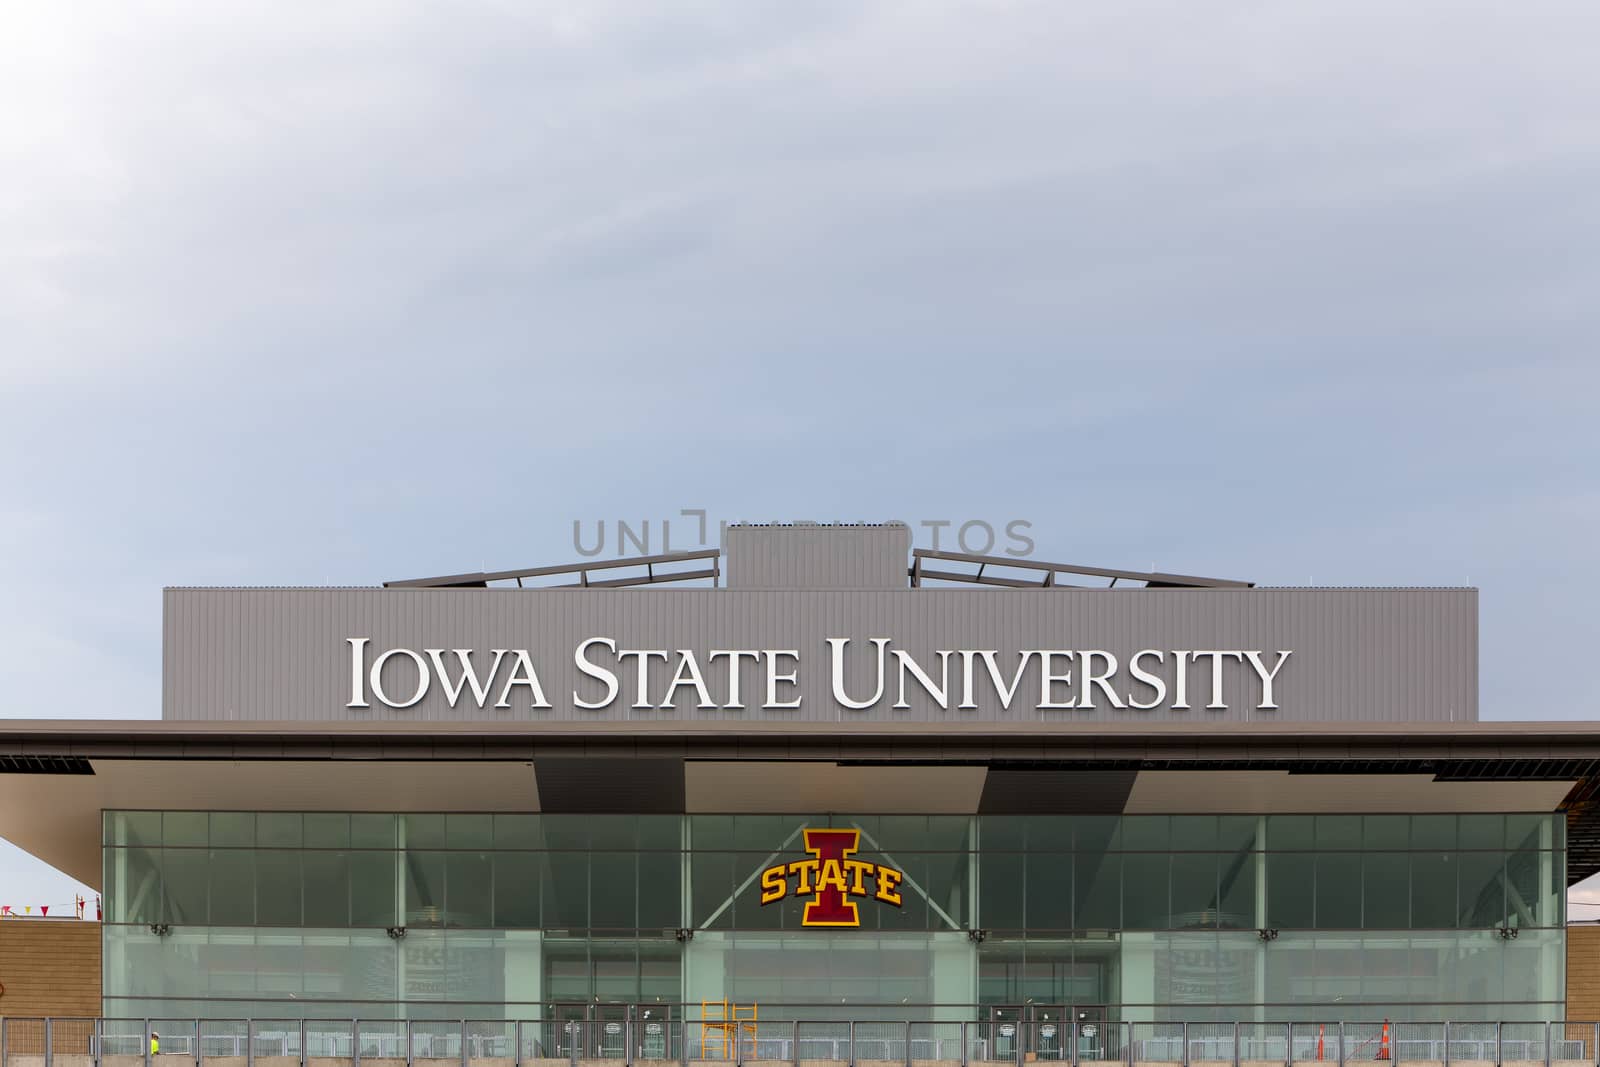 AUGUST 6, 2015: Jack Trice Football Stadium on the campus of the University of Iowa State.